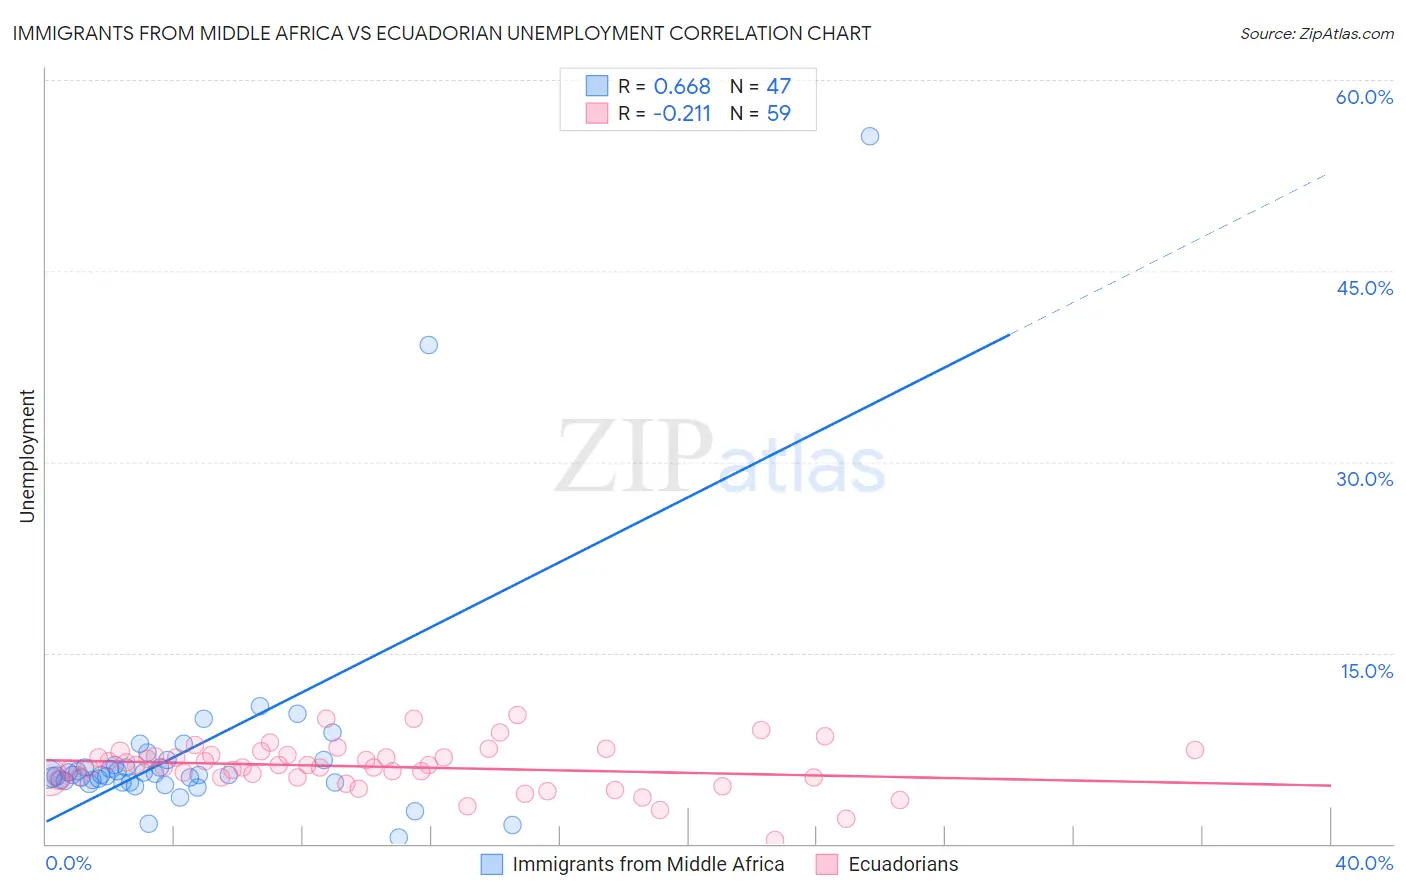 Immigrants from Middle Africa vs Ecuadorian Unemployment